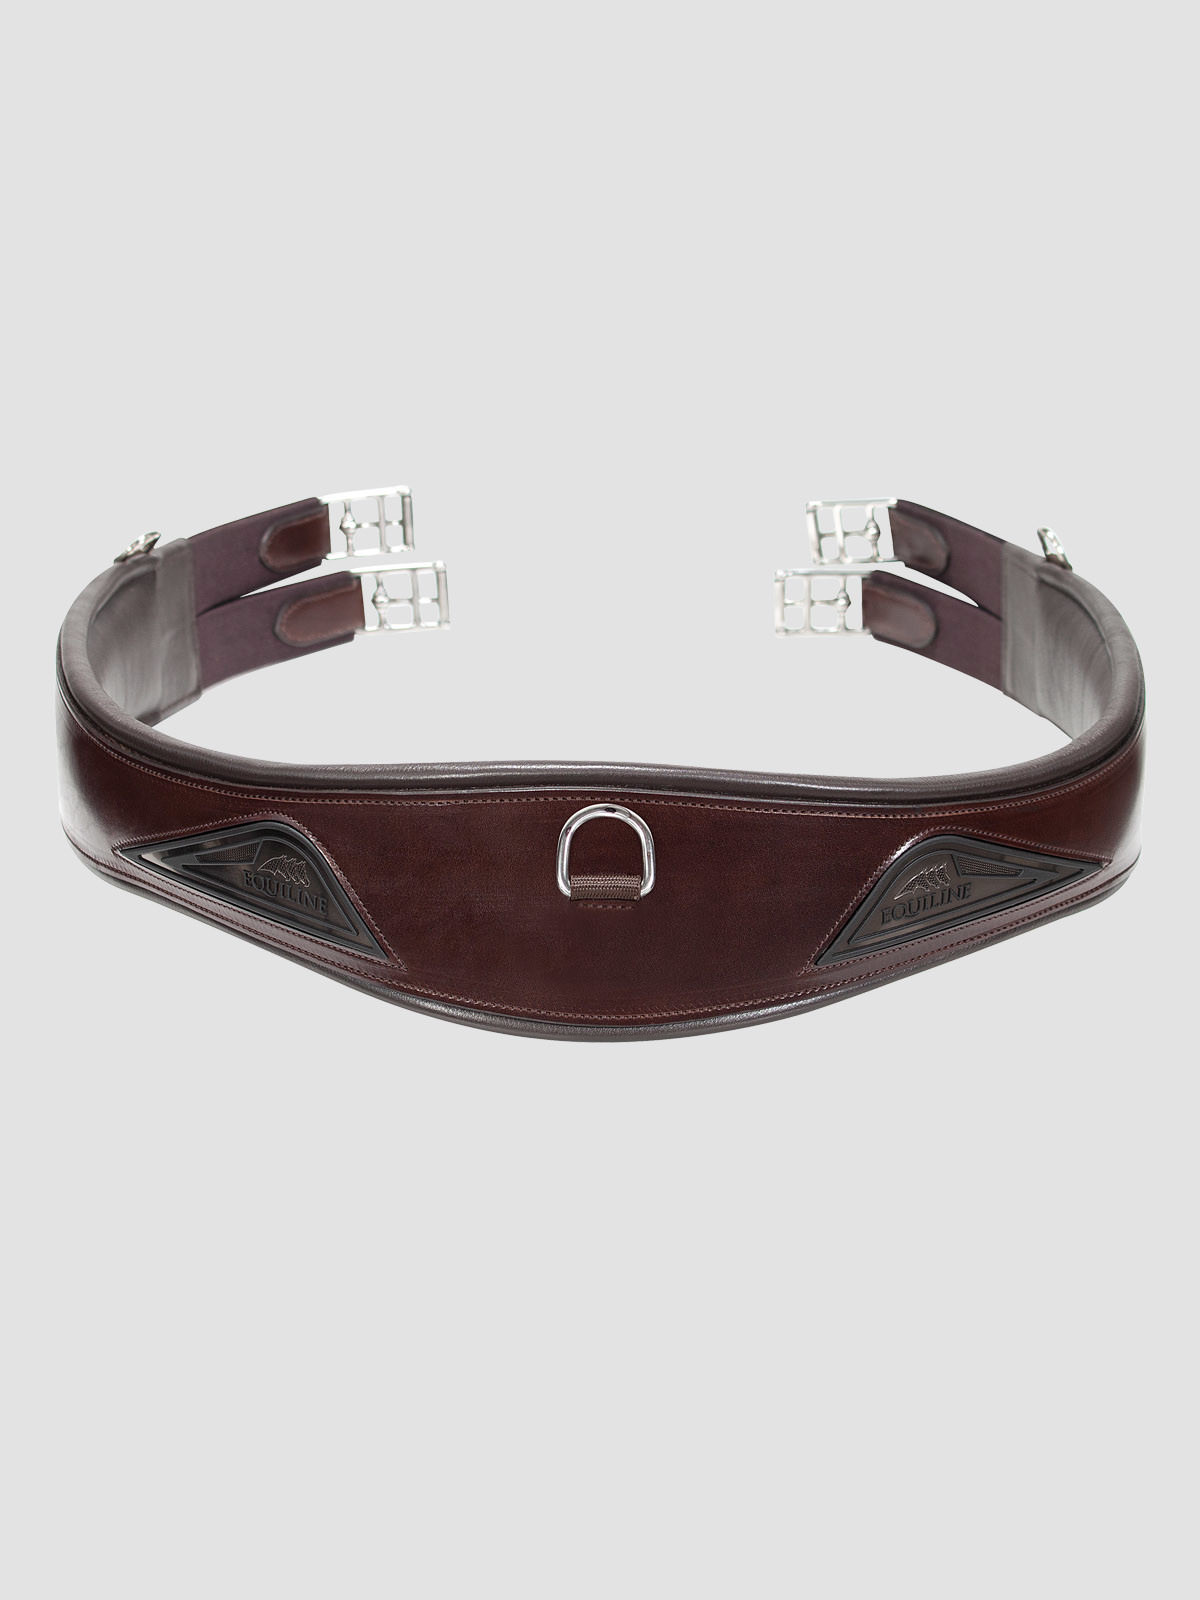 Brown Equiline leather girth